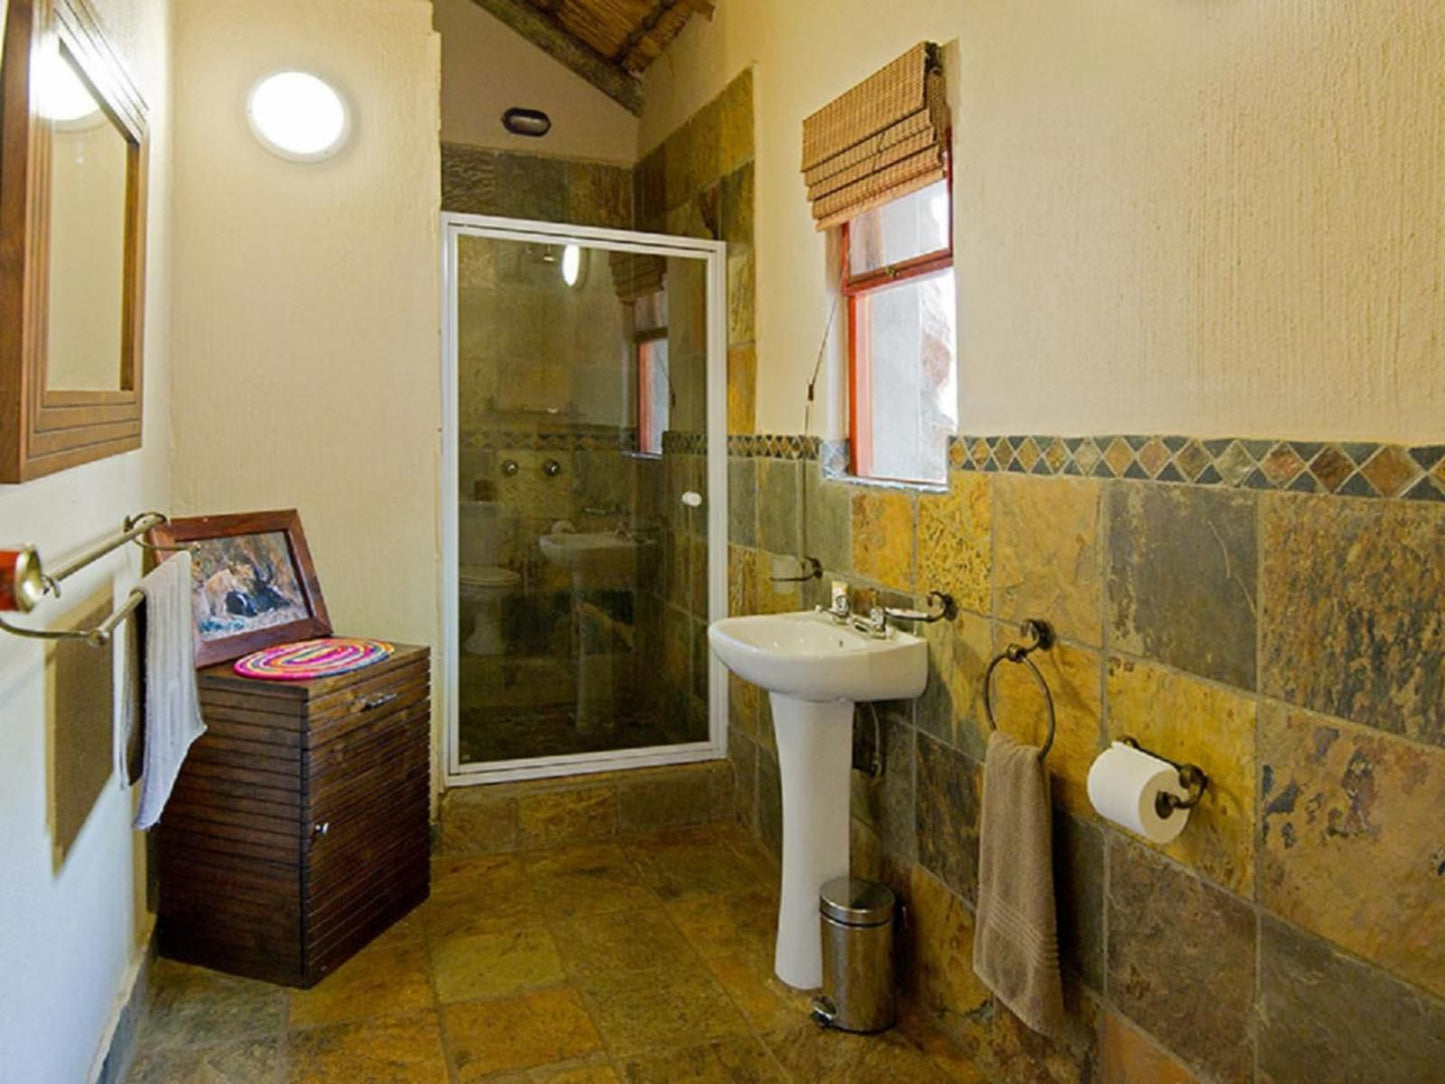 Blyde River Wilderness Lodge Blyde River Canyon Mpumalanga South Africa Bathroom